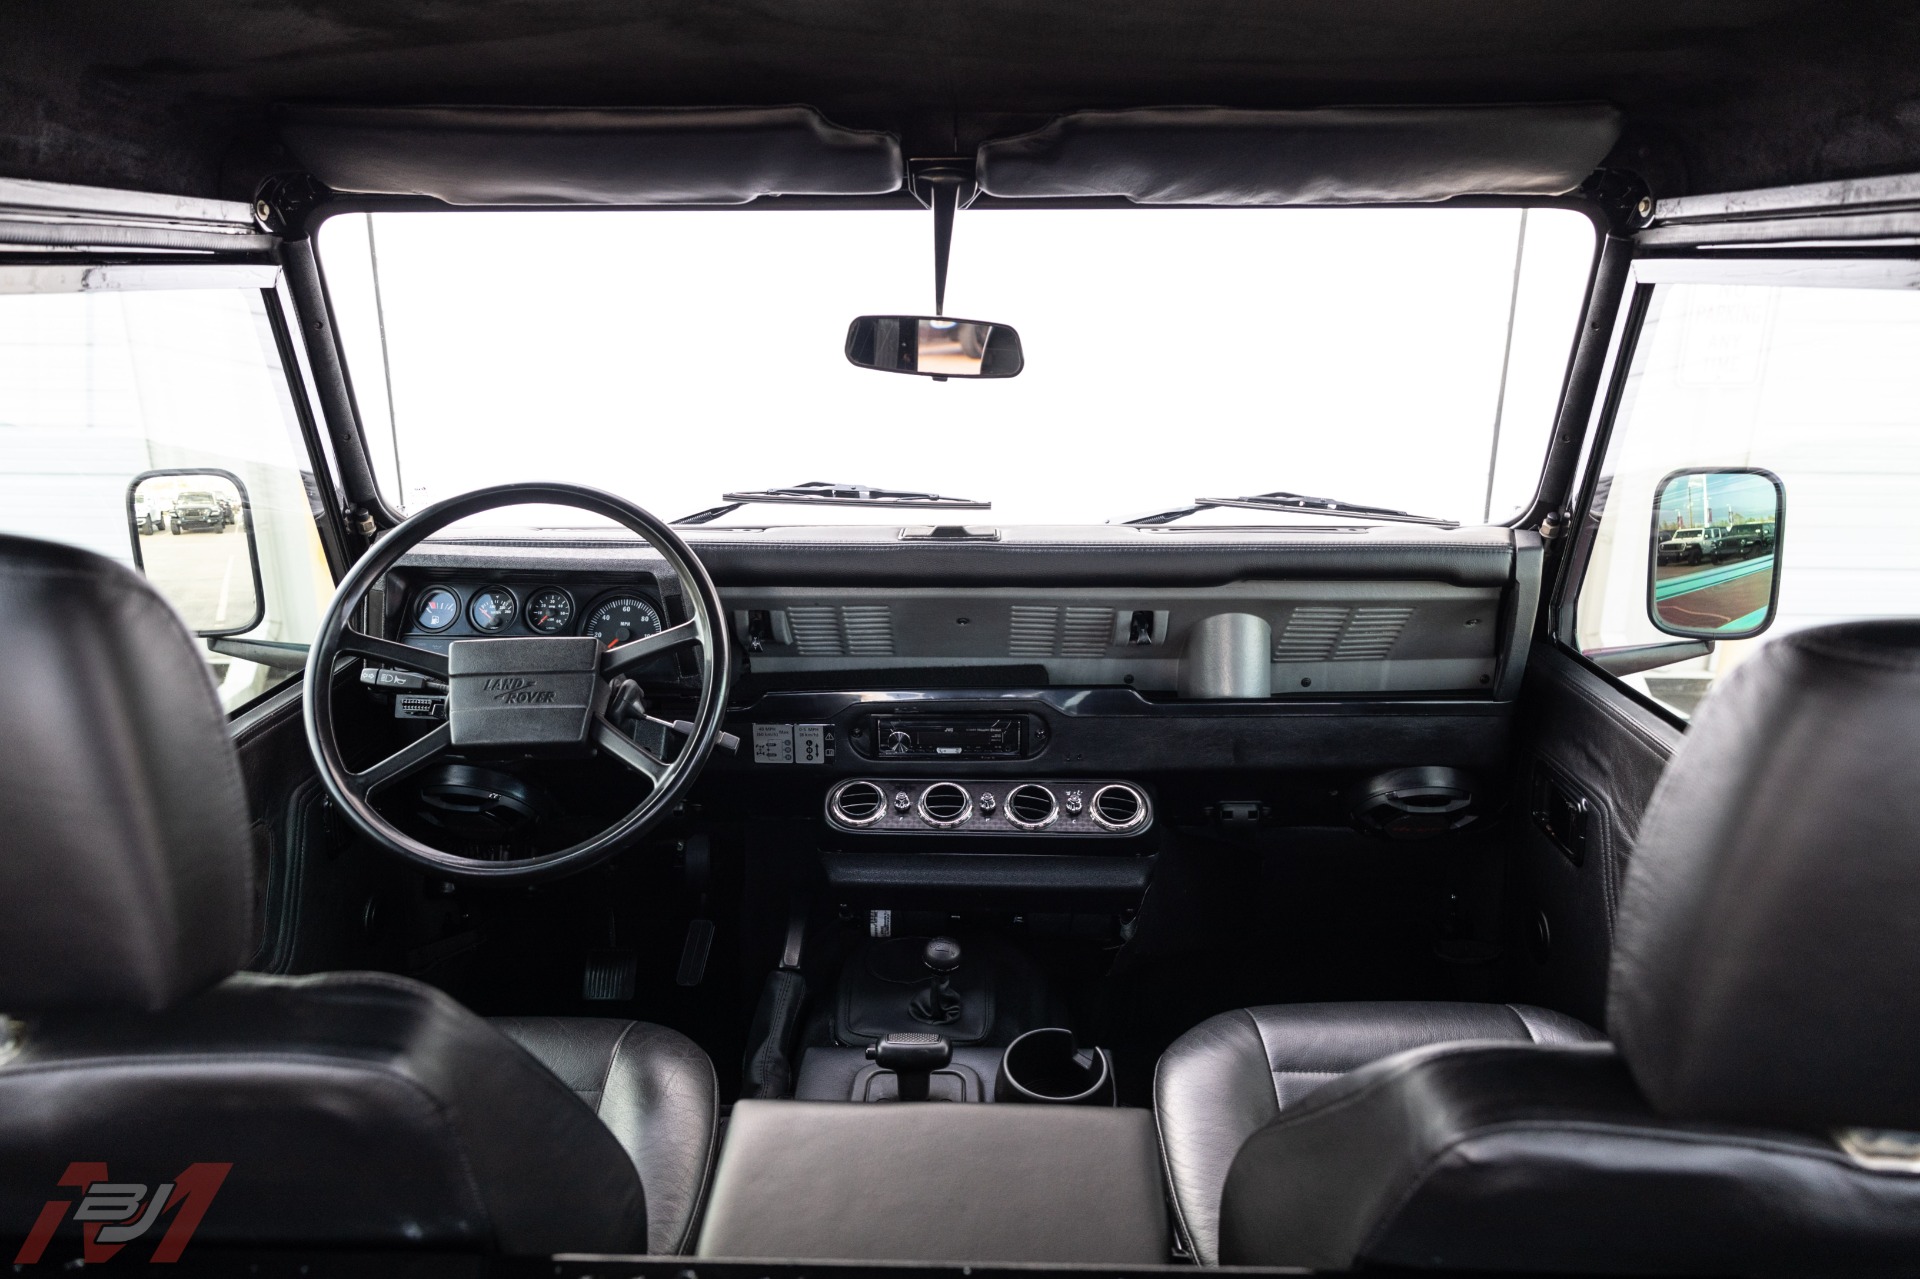 Used-1986-Land-Rover-Defender-90-LS3-Conversion